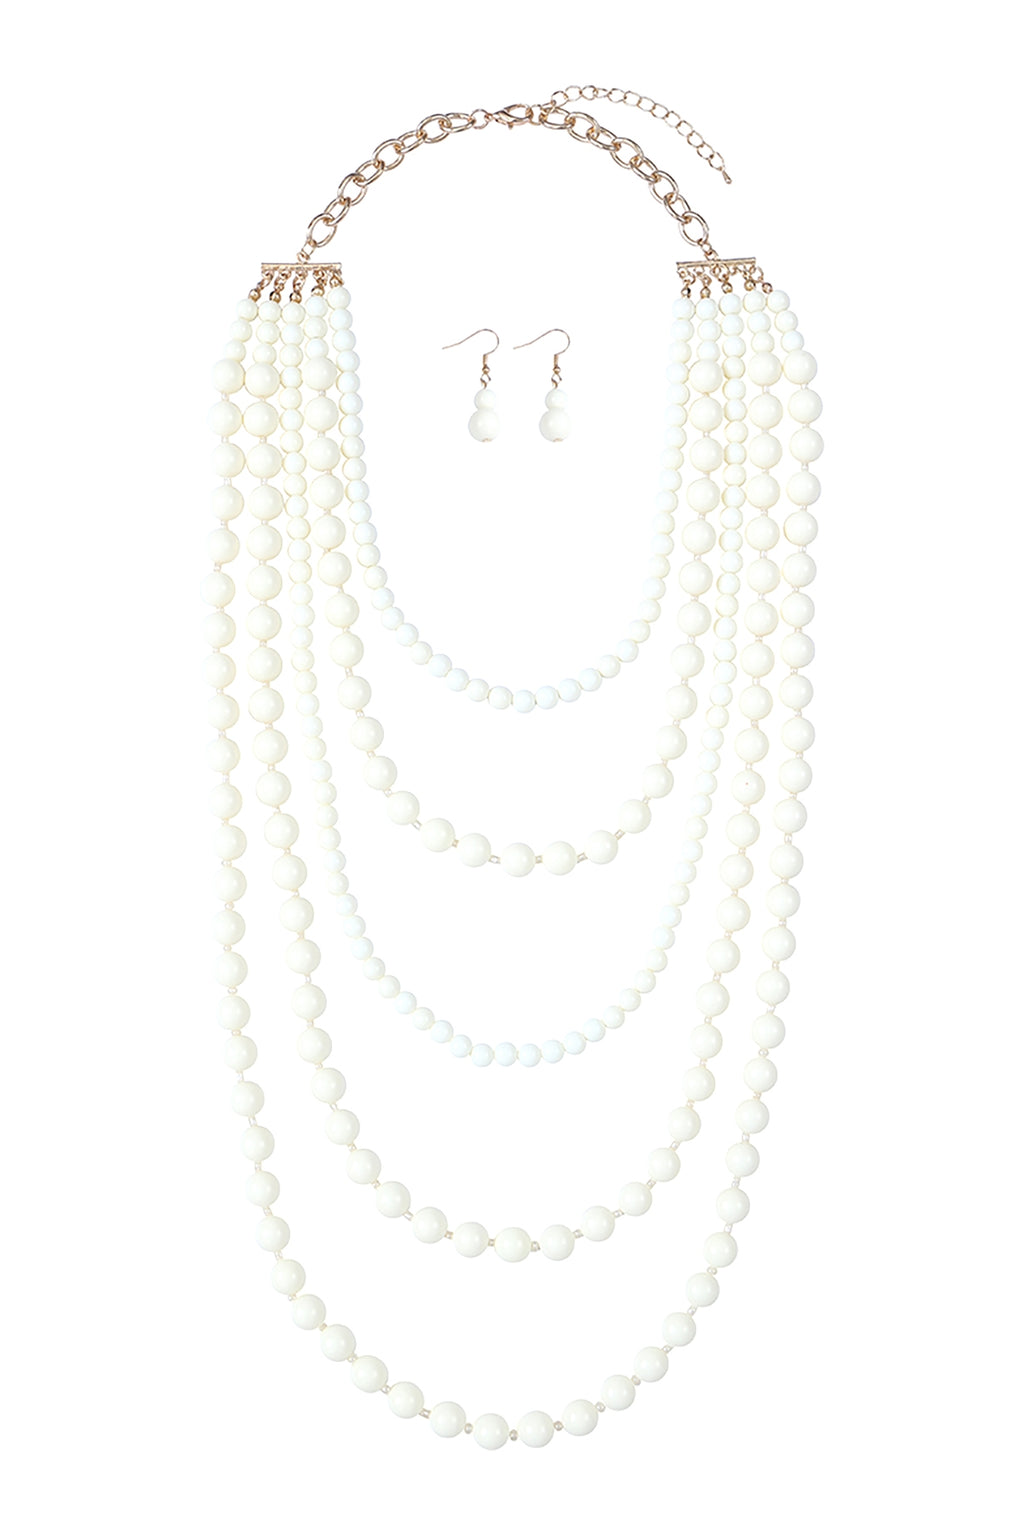 Multi Layered Beads Necklace and Earrings Set Natural - Pack of 6